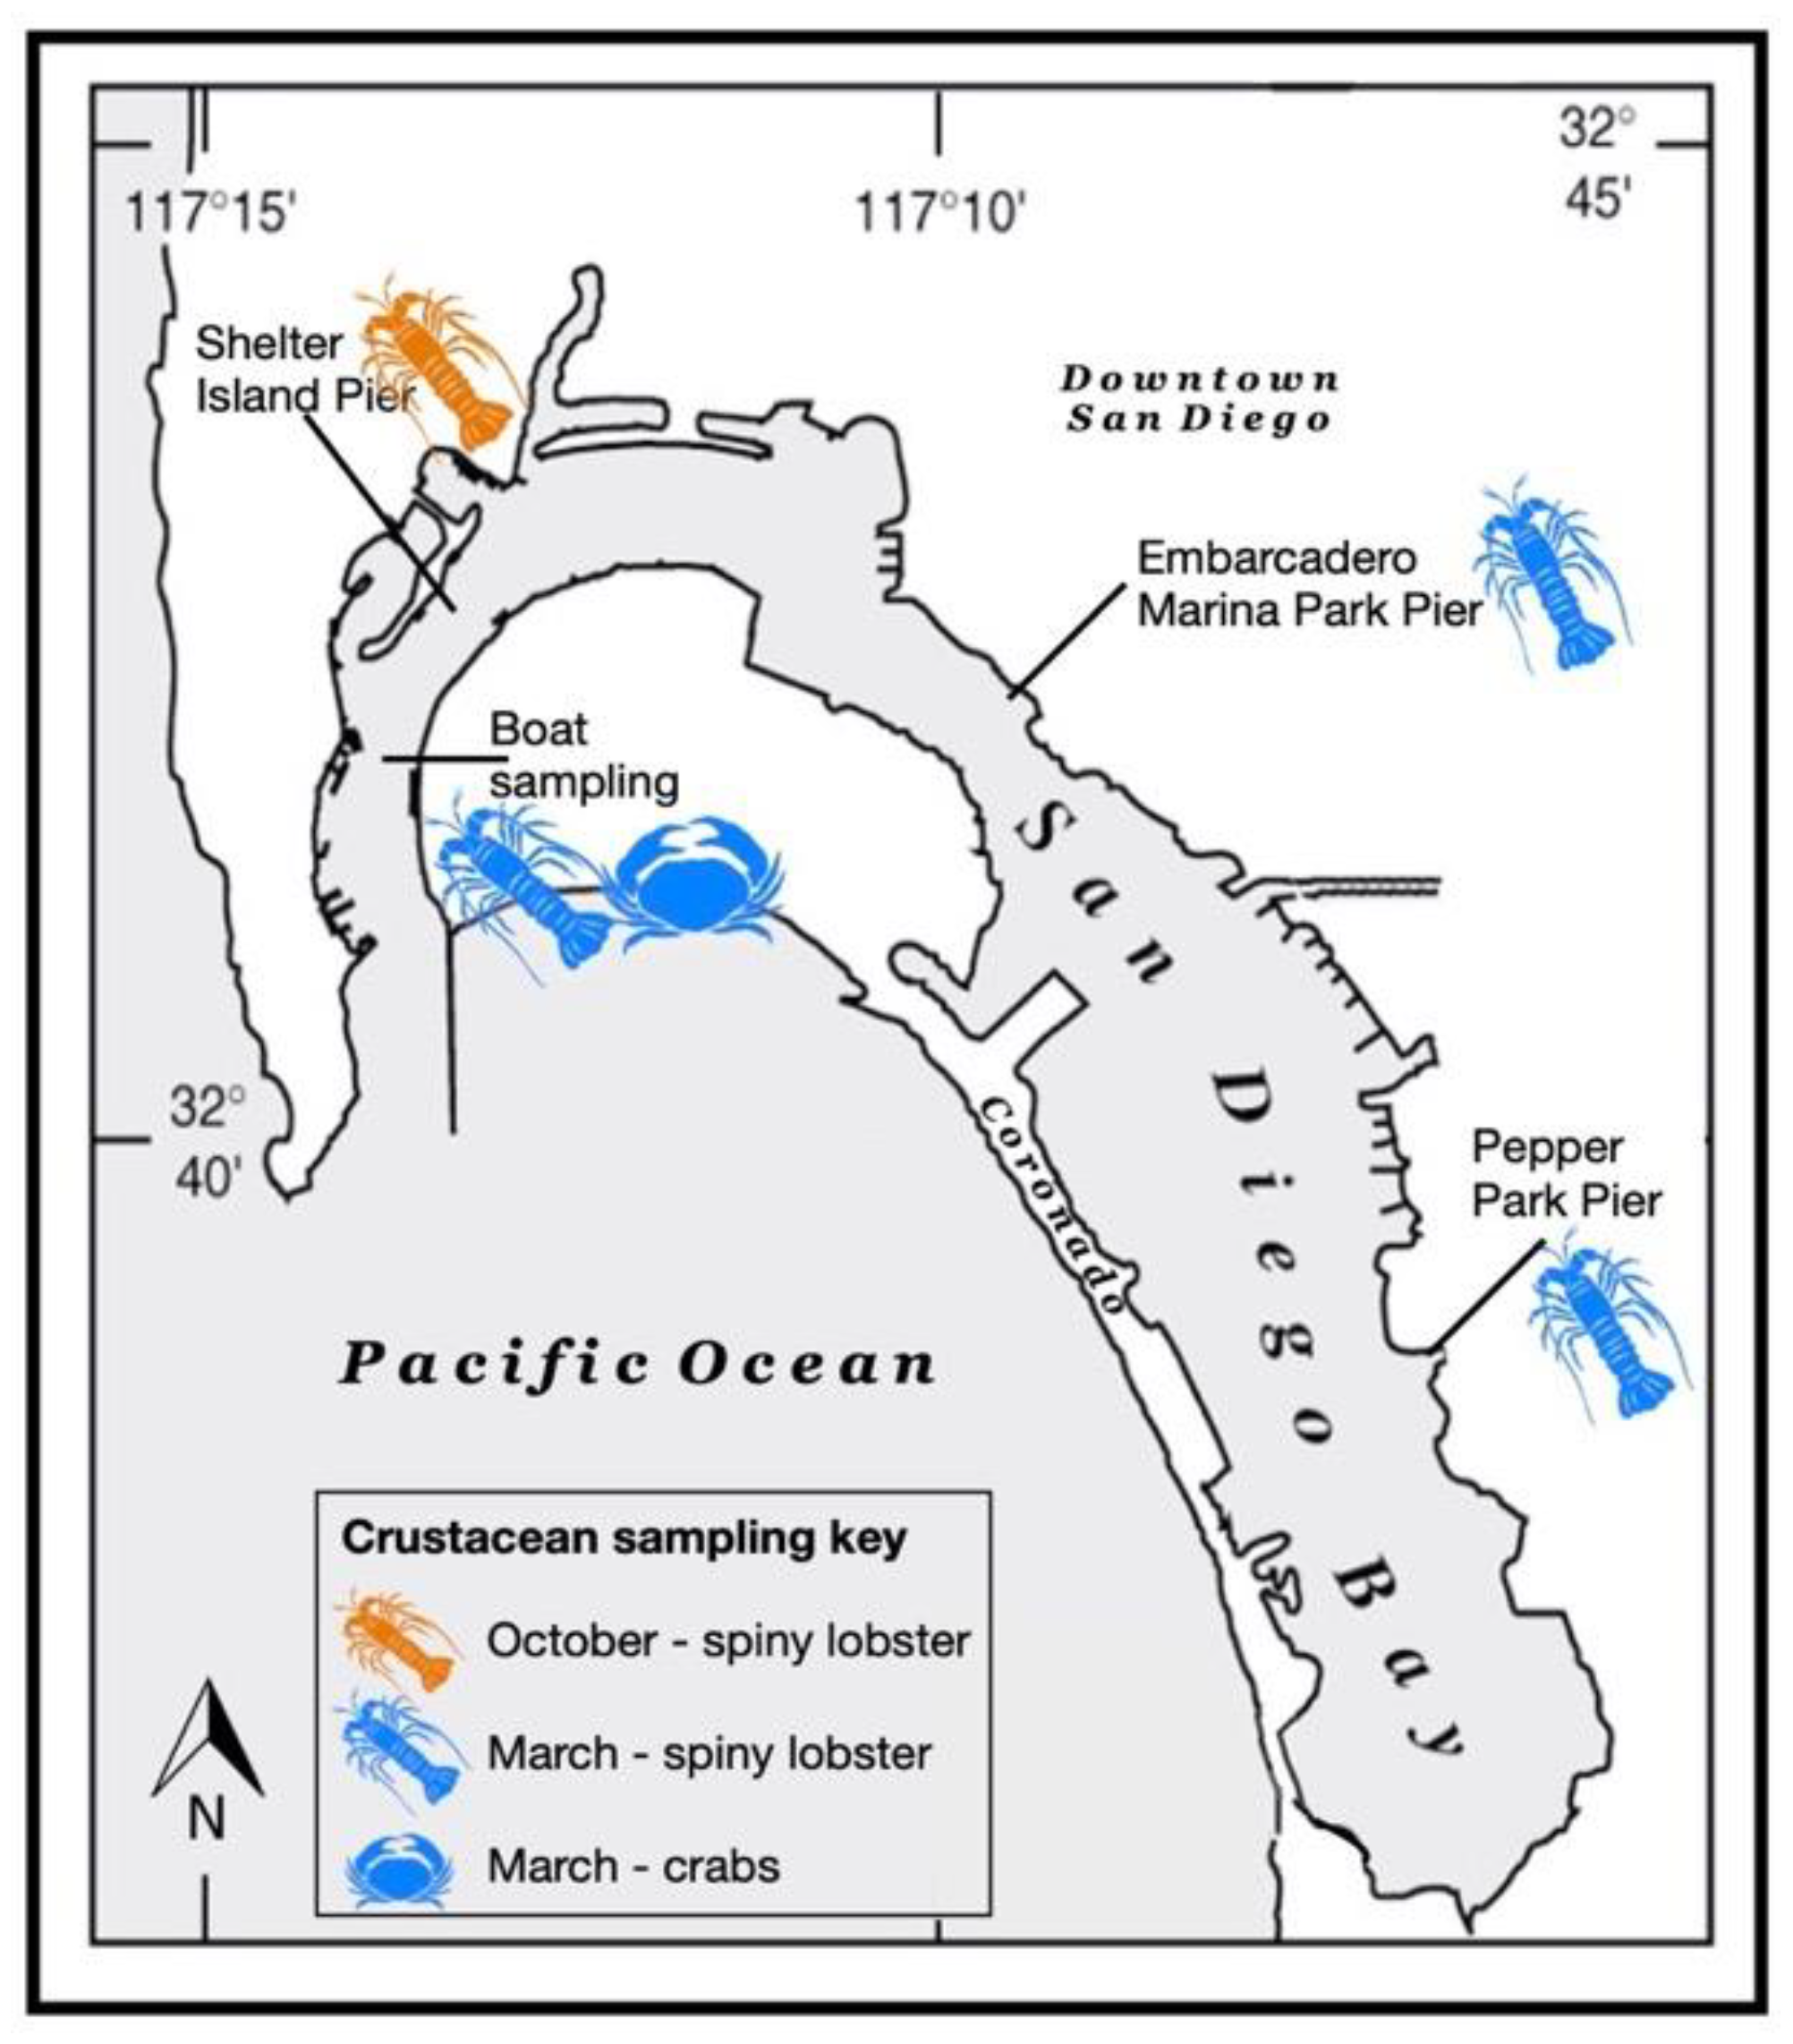 Environments Free Full-Text Contaminant Risk and Social Vulnerability Associated with Crustacean Shellfish Harvest in the Highly Urbanized San Diego Bay, image photo